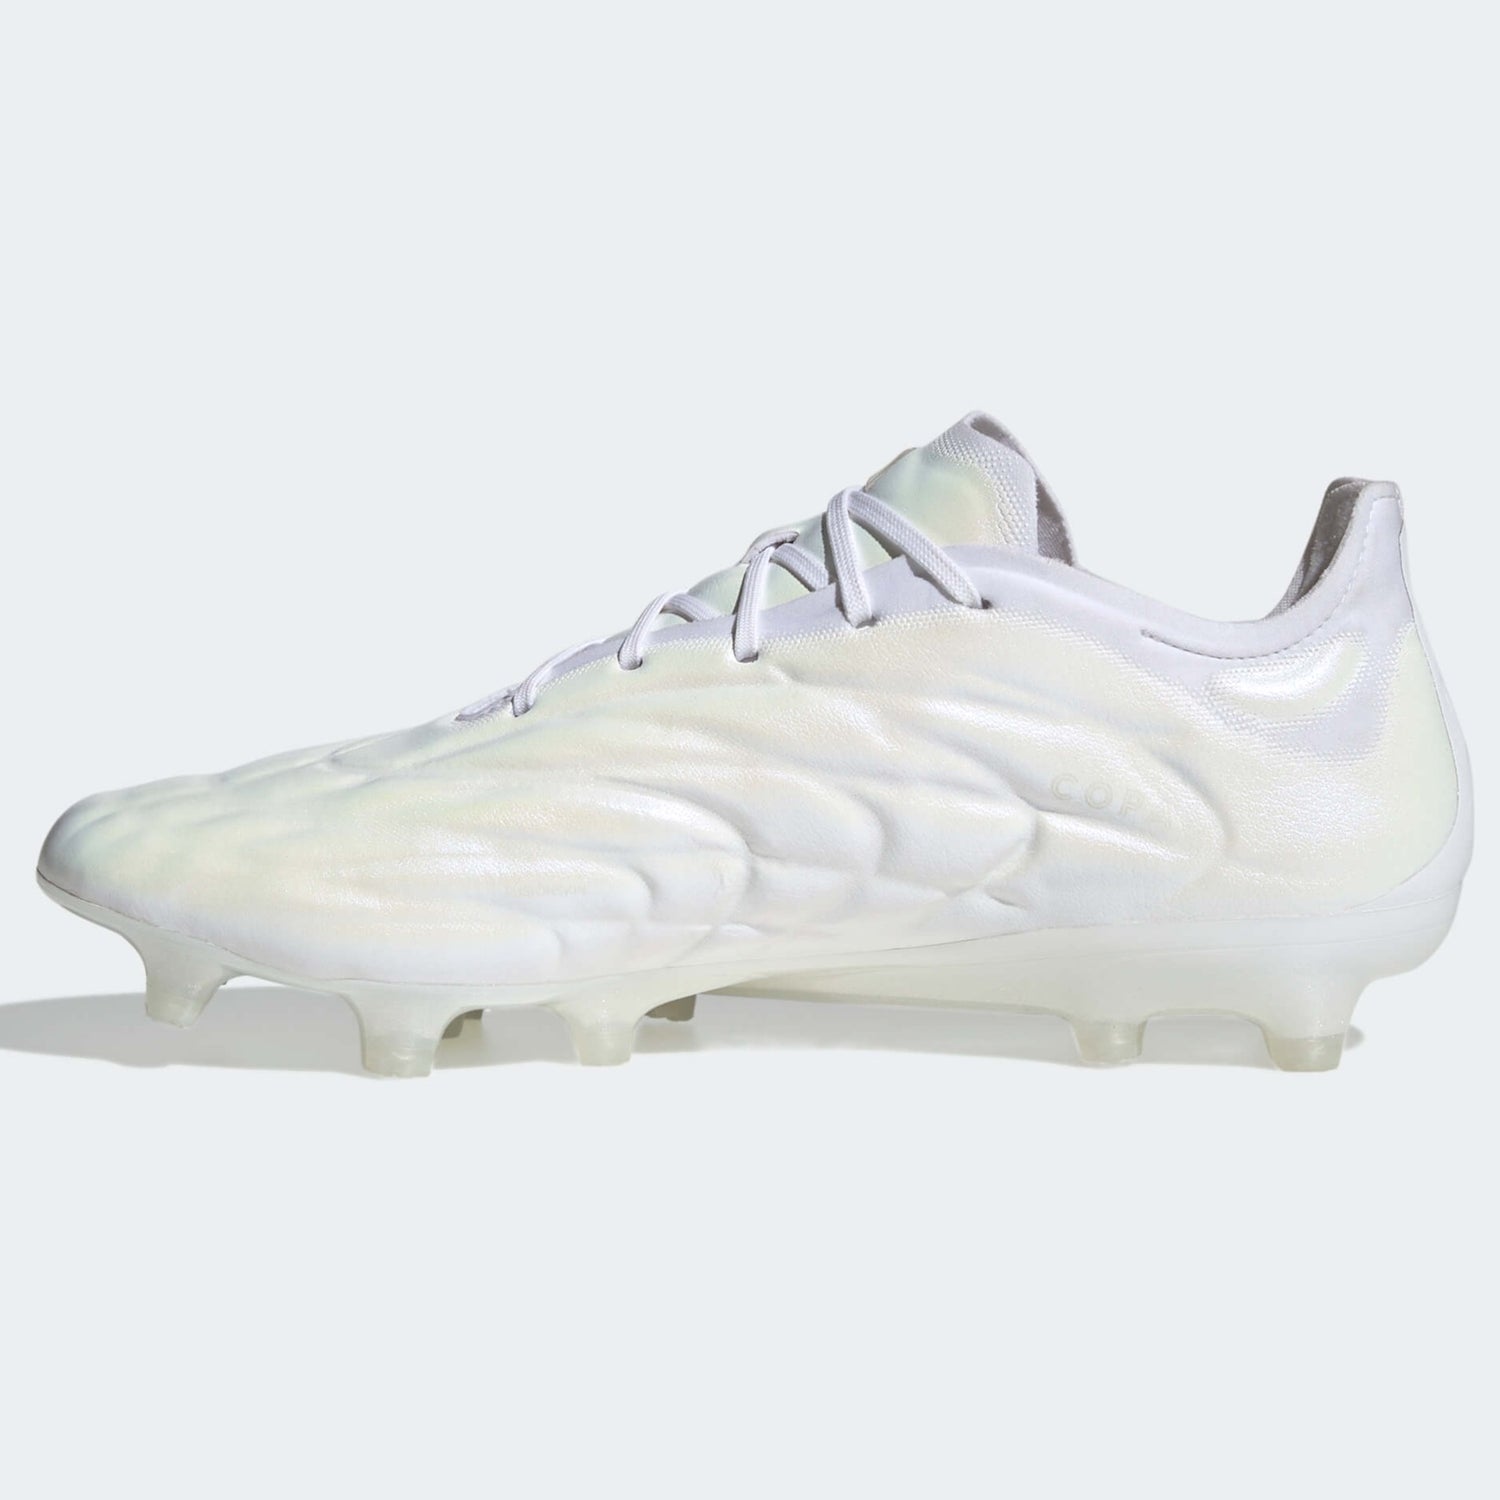 adidas Copa Pure.1 FG -  Pearlized Pack (SP23) (Side 2)